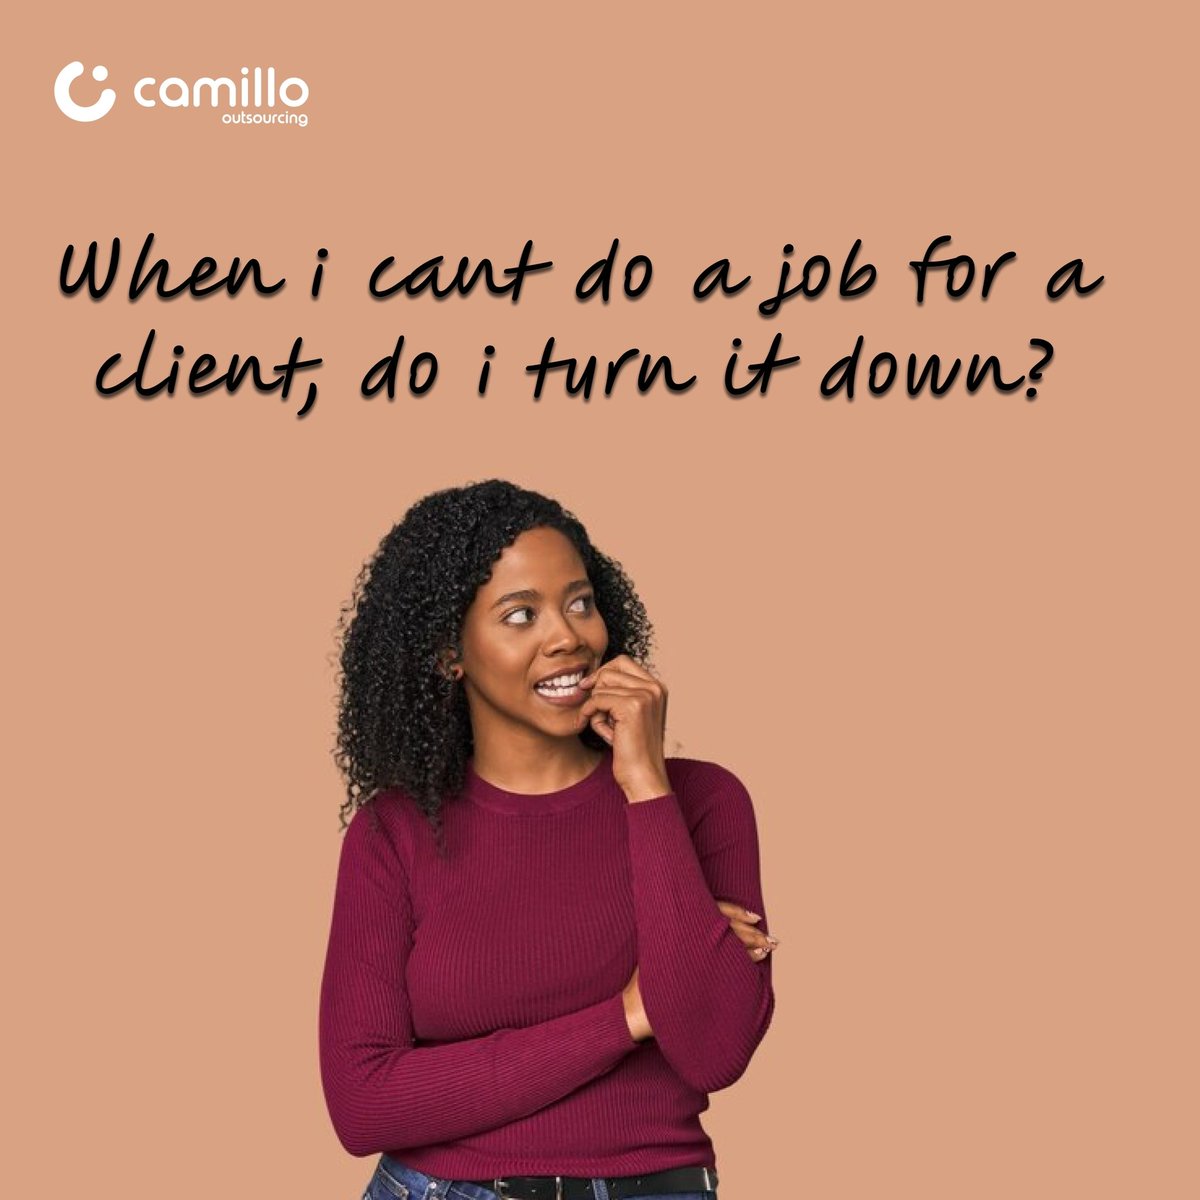 The answer is very simple.
Just Outsource it!

Let Camillo be your Outsource partner today.

info@camillo.ng
0201-343-8060
0201-343-8061

#camillo #outsource #outsourcingpartner
#businessprocess #businessowner